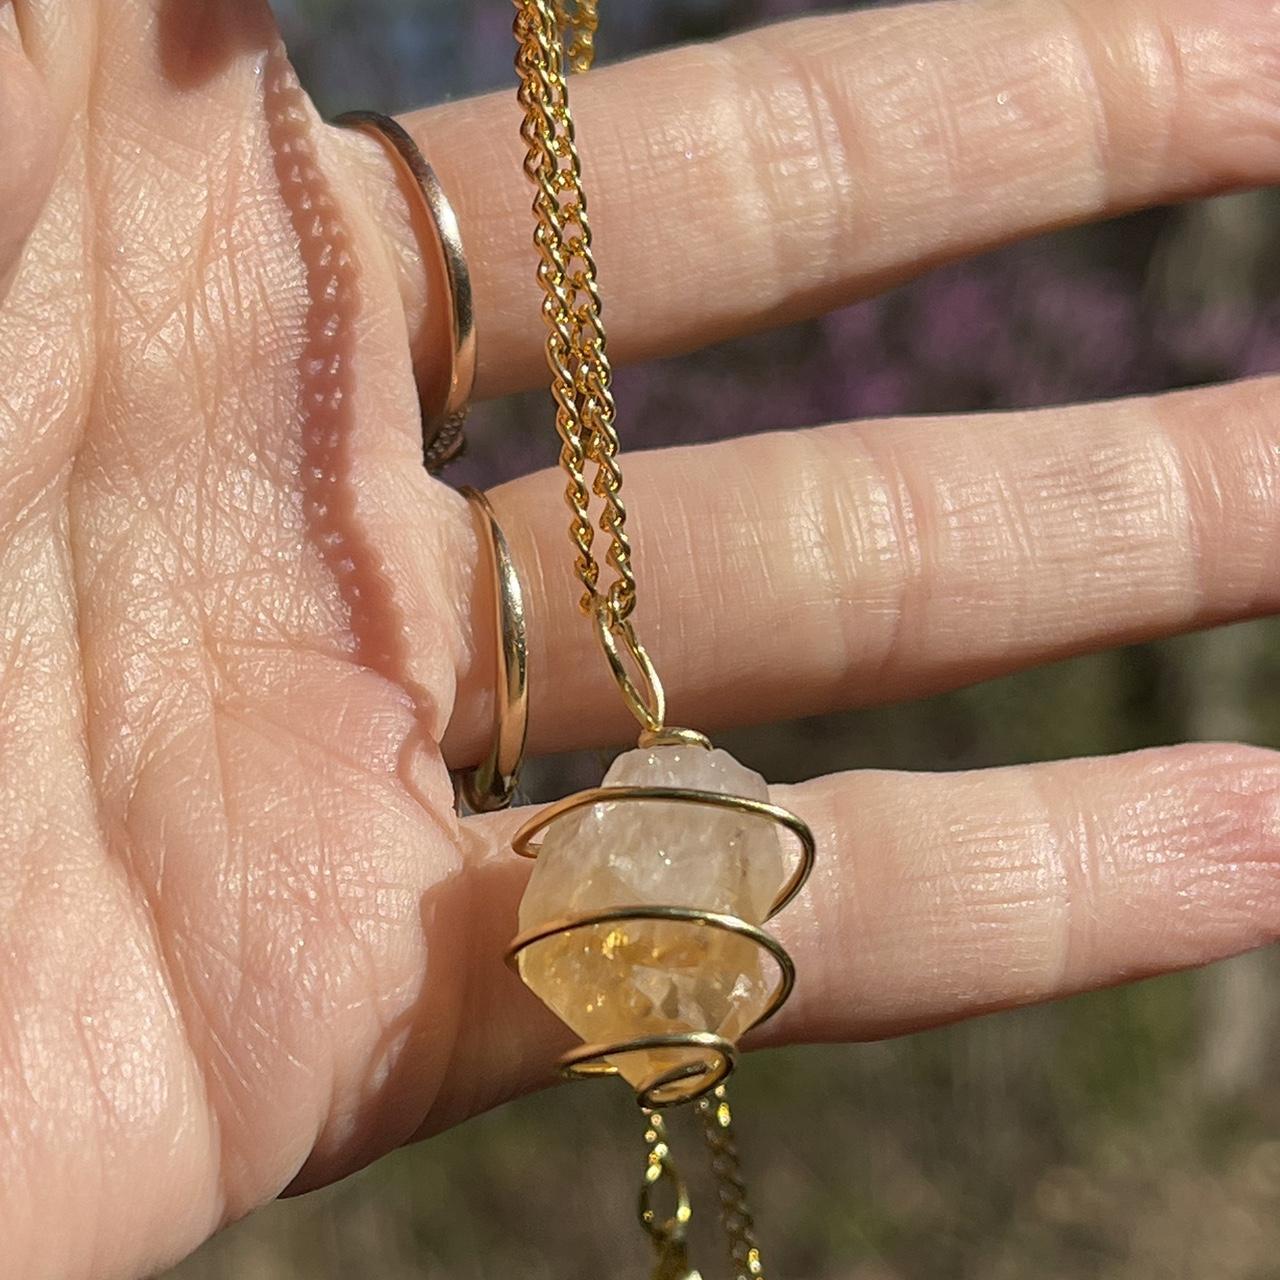 Citrine crystal cage necklace. Made with real - Depop